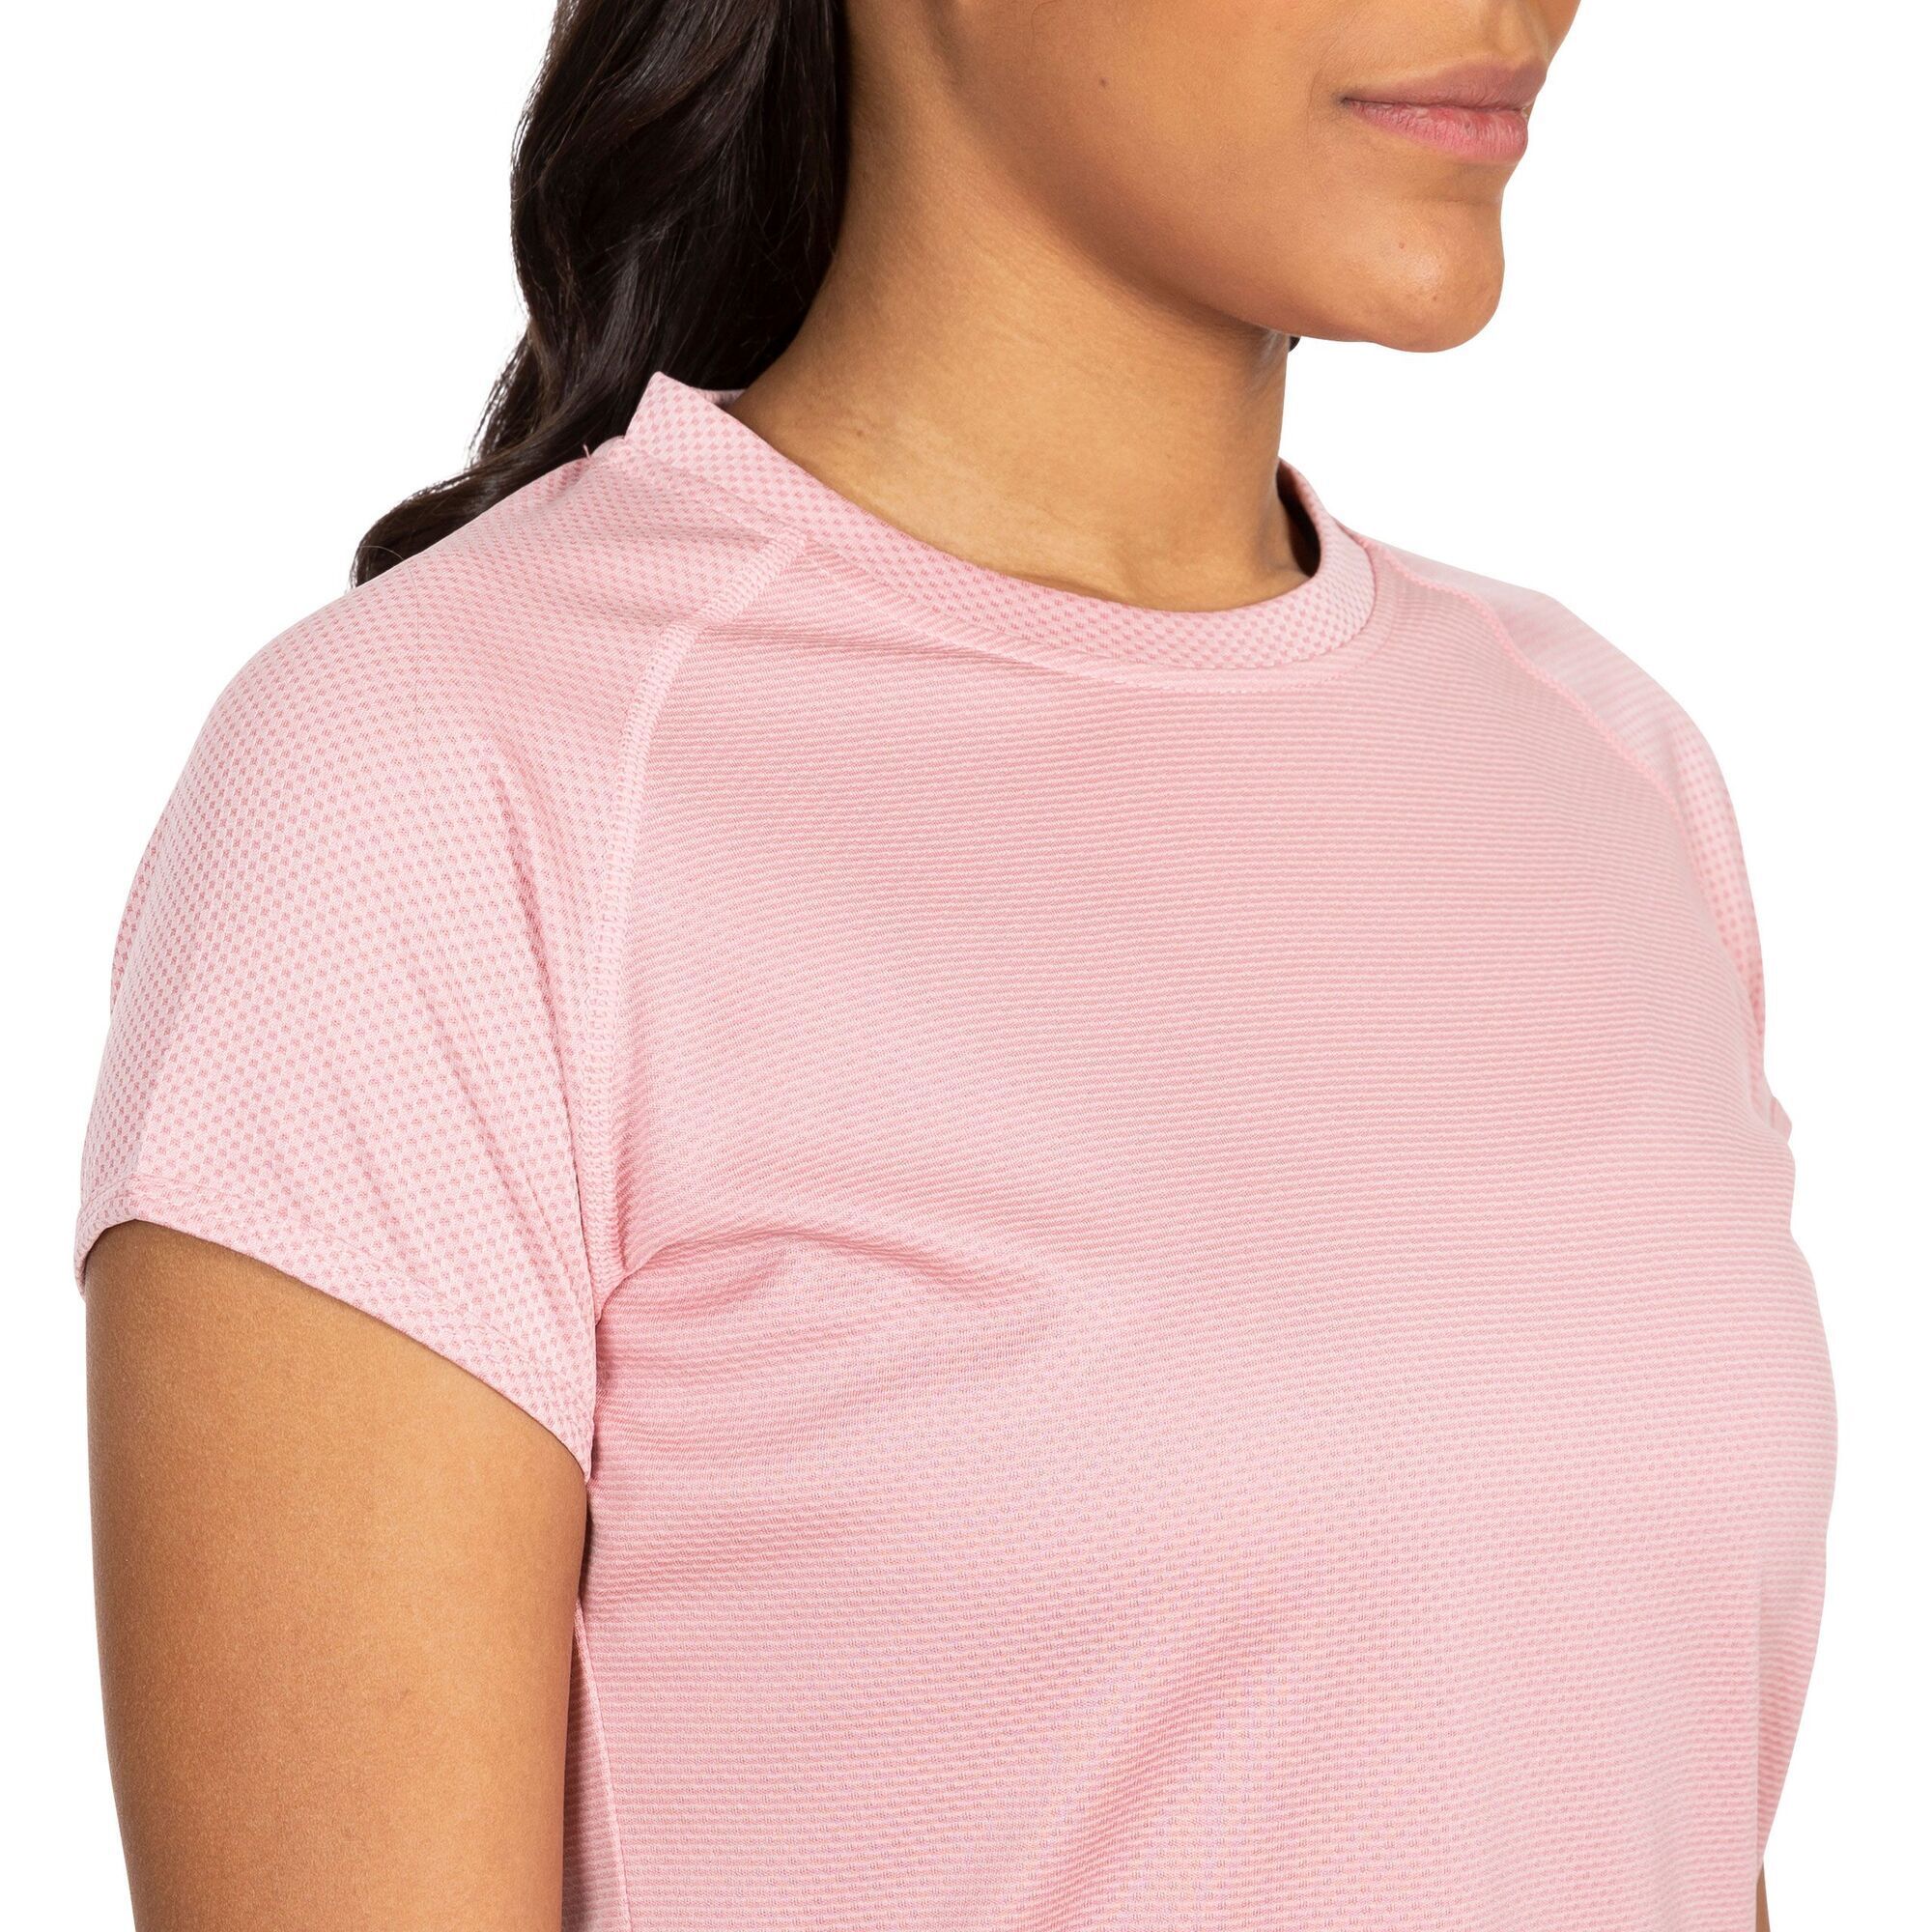 100% Polyester. Short sleeve. Round neck. Raglan sleeve. Contrast inner back neck binding. Reflective printed logos. Wicking. Quick dry. Trespass Womens Chest Sizing (approx): XS/8 - 32in/81cm, S/10 - 34in/86cm, M/12 - 36in/91.4cm, L/14 - 38in/96.5cm, XL/16 - 40in/101.5cm, XXL/18 - 42in/106.5cm.